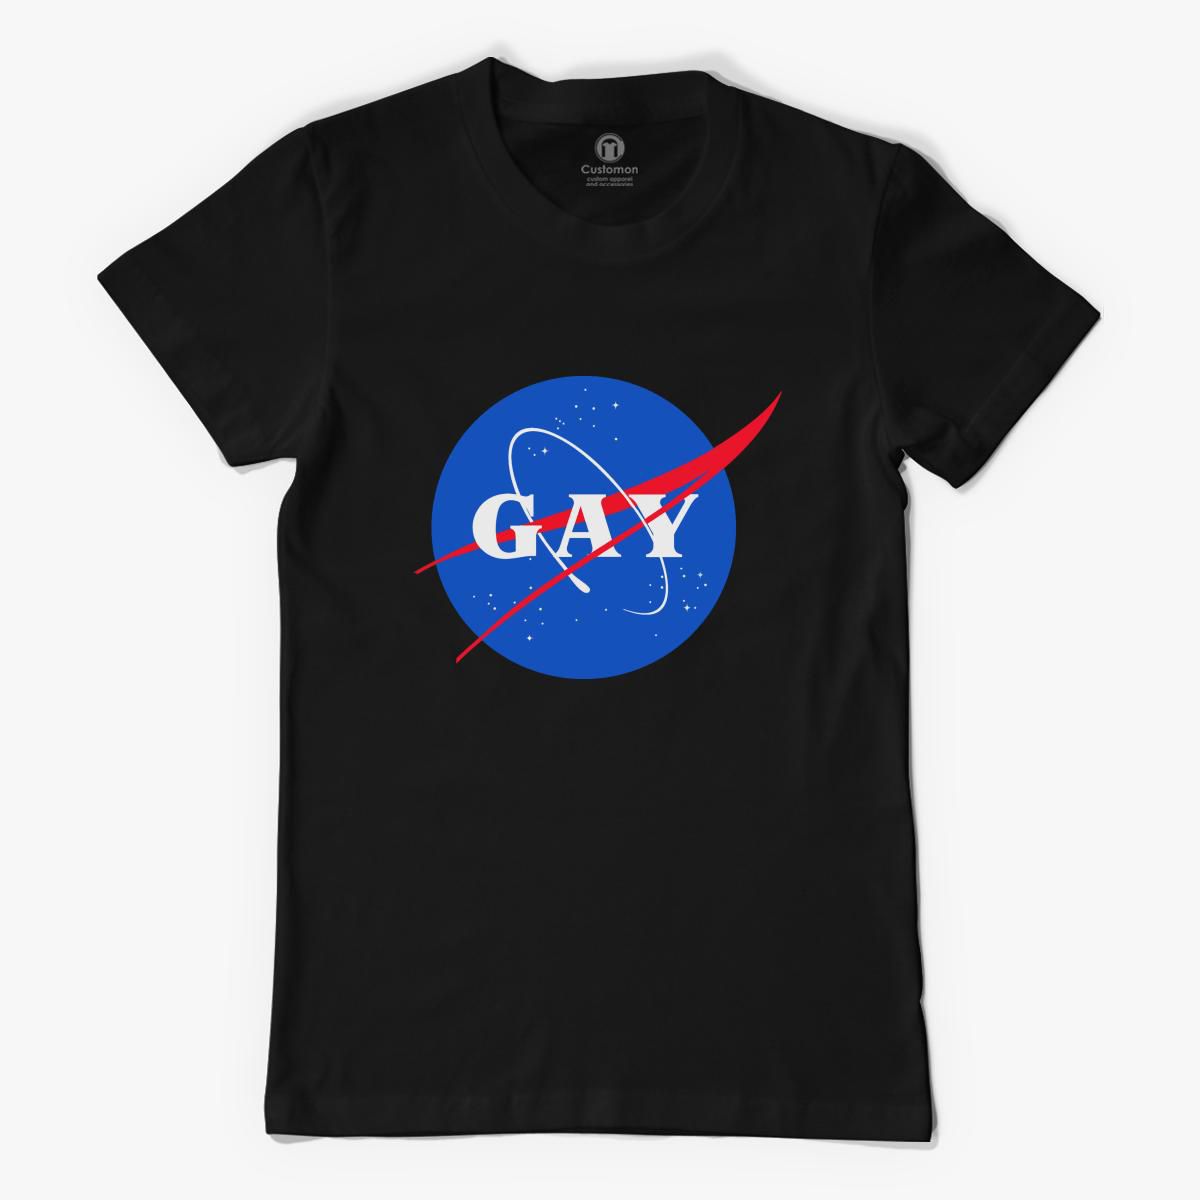 target selling gay pride t shirts to children